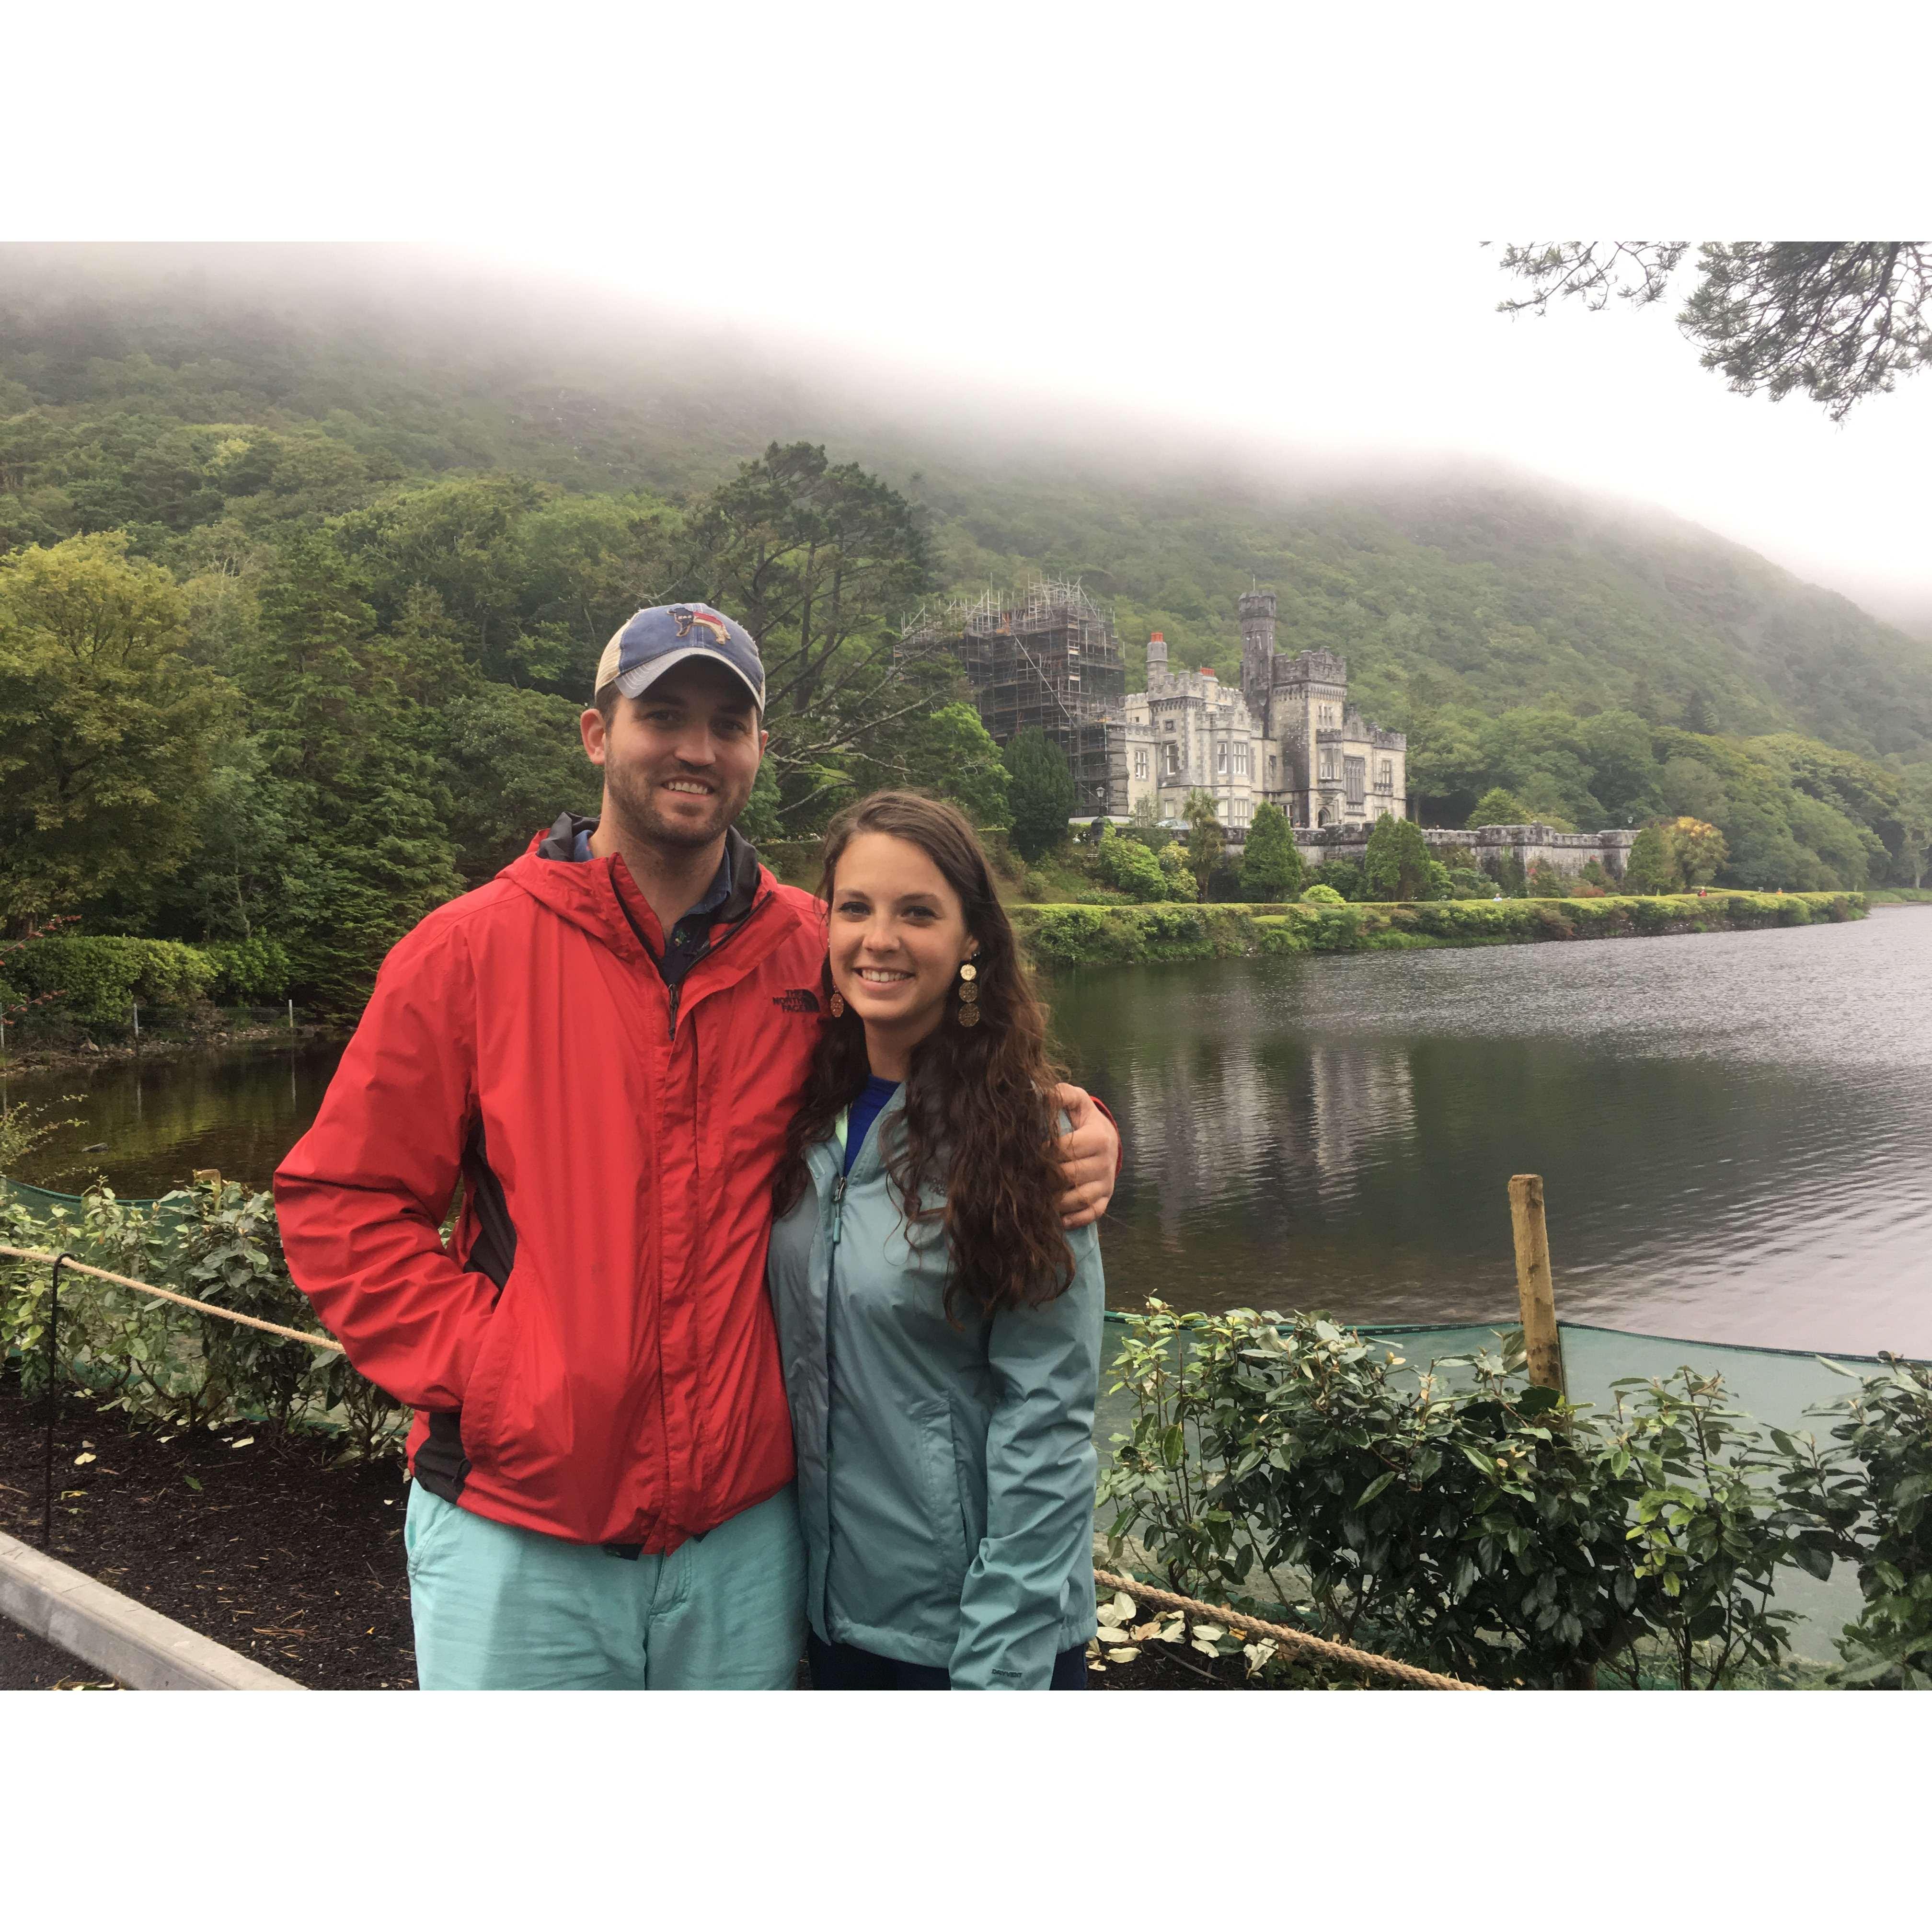 Our trip to Ireland